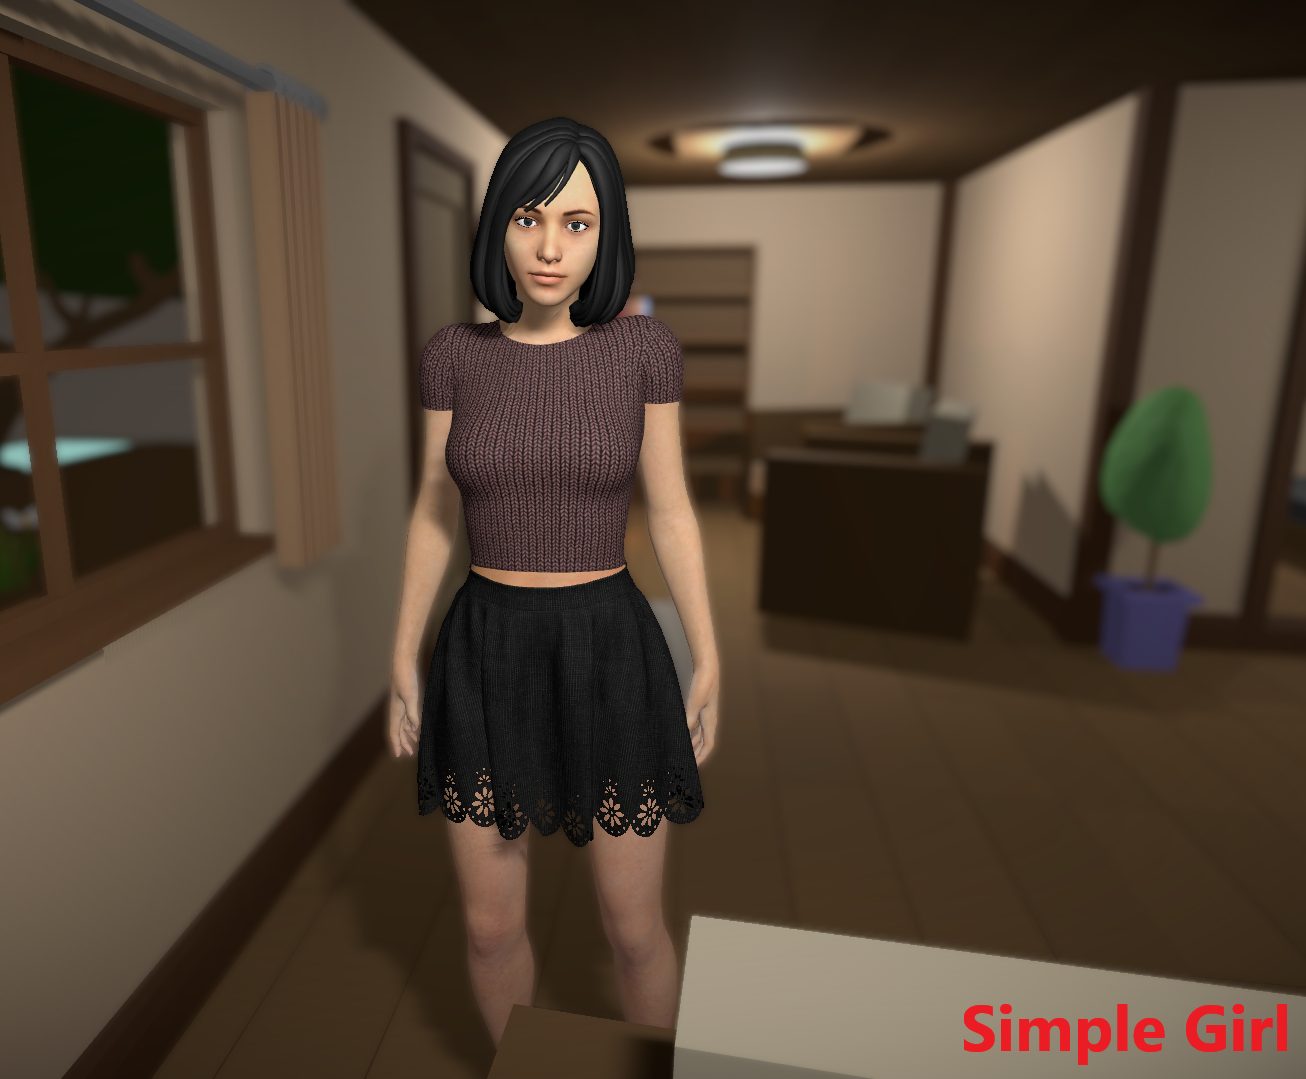 Porn Game Under 50mb - Android - Simple Girl - Version 1.39 Download